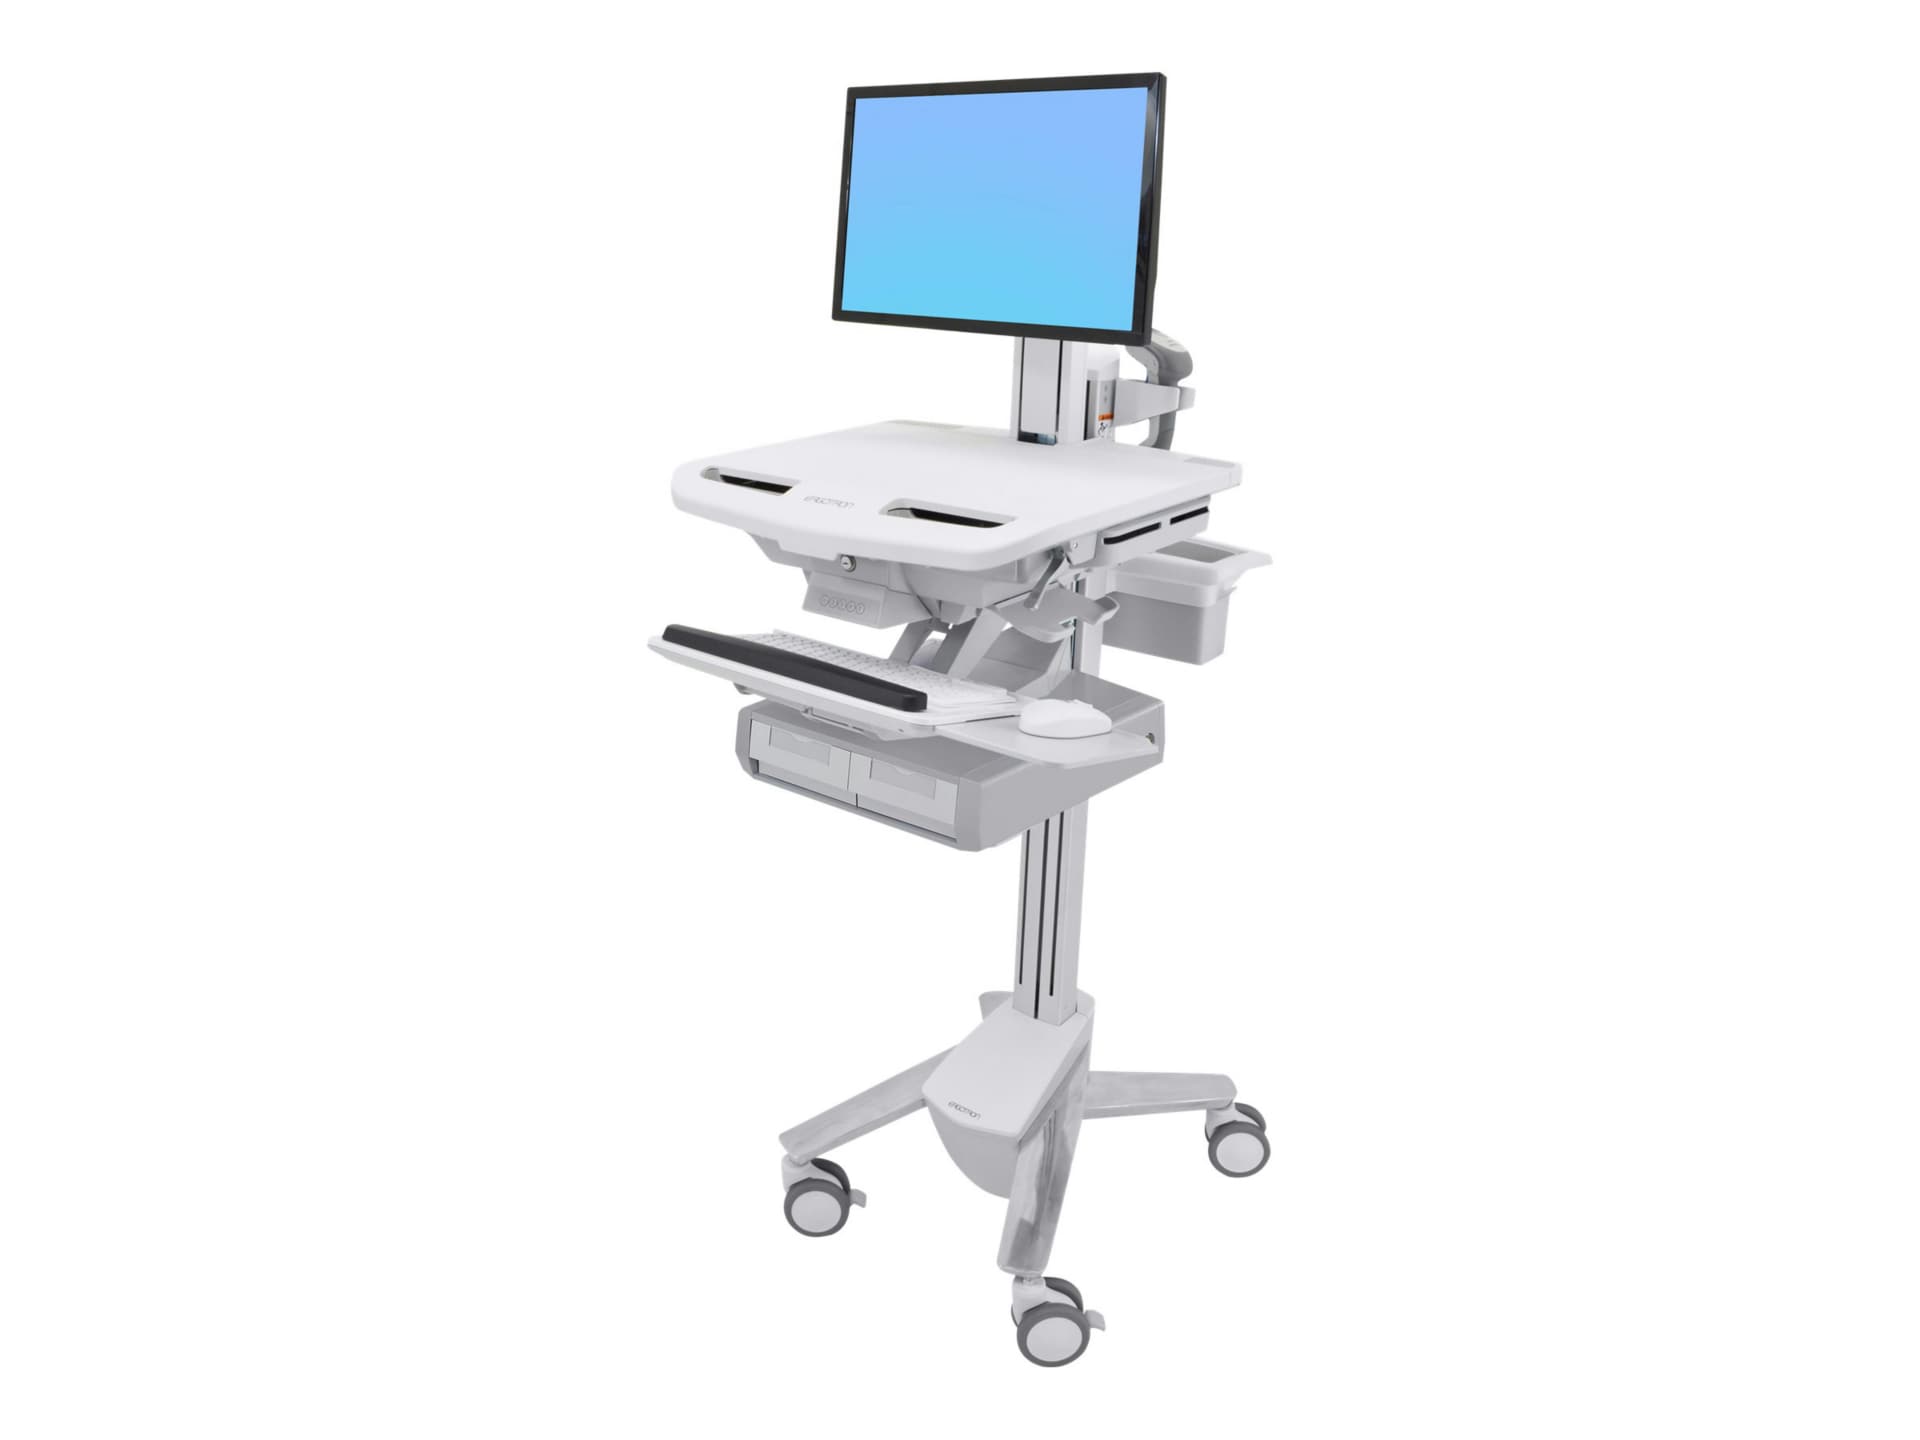 Ergotron StyleView Cart with LCD Pivot, 2 Drawers cart - open architecture - for LCD display / keyboard / mouse / CPU /